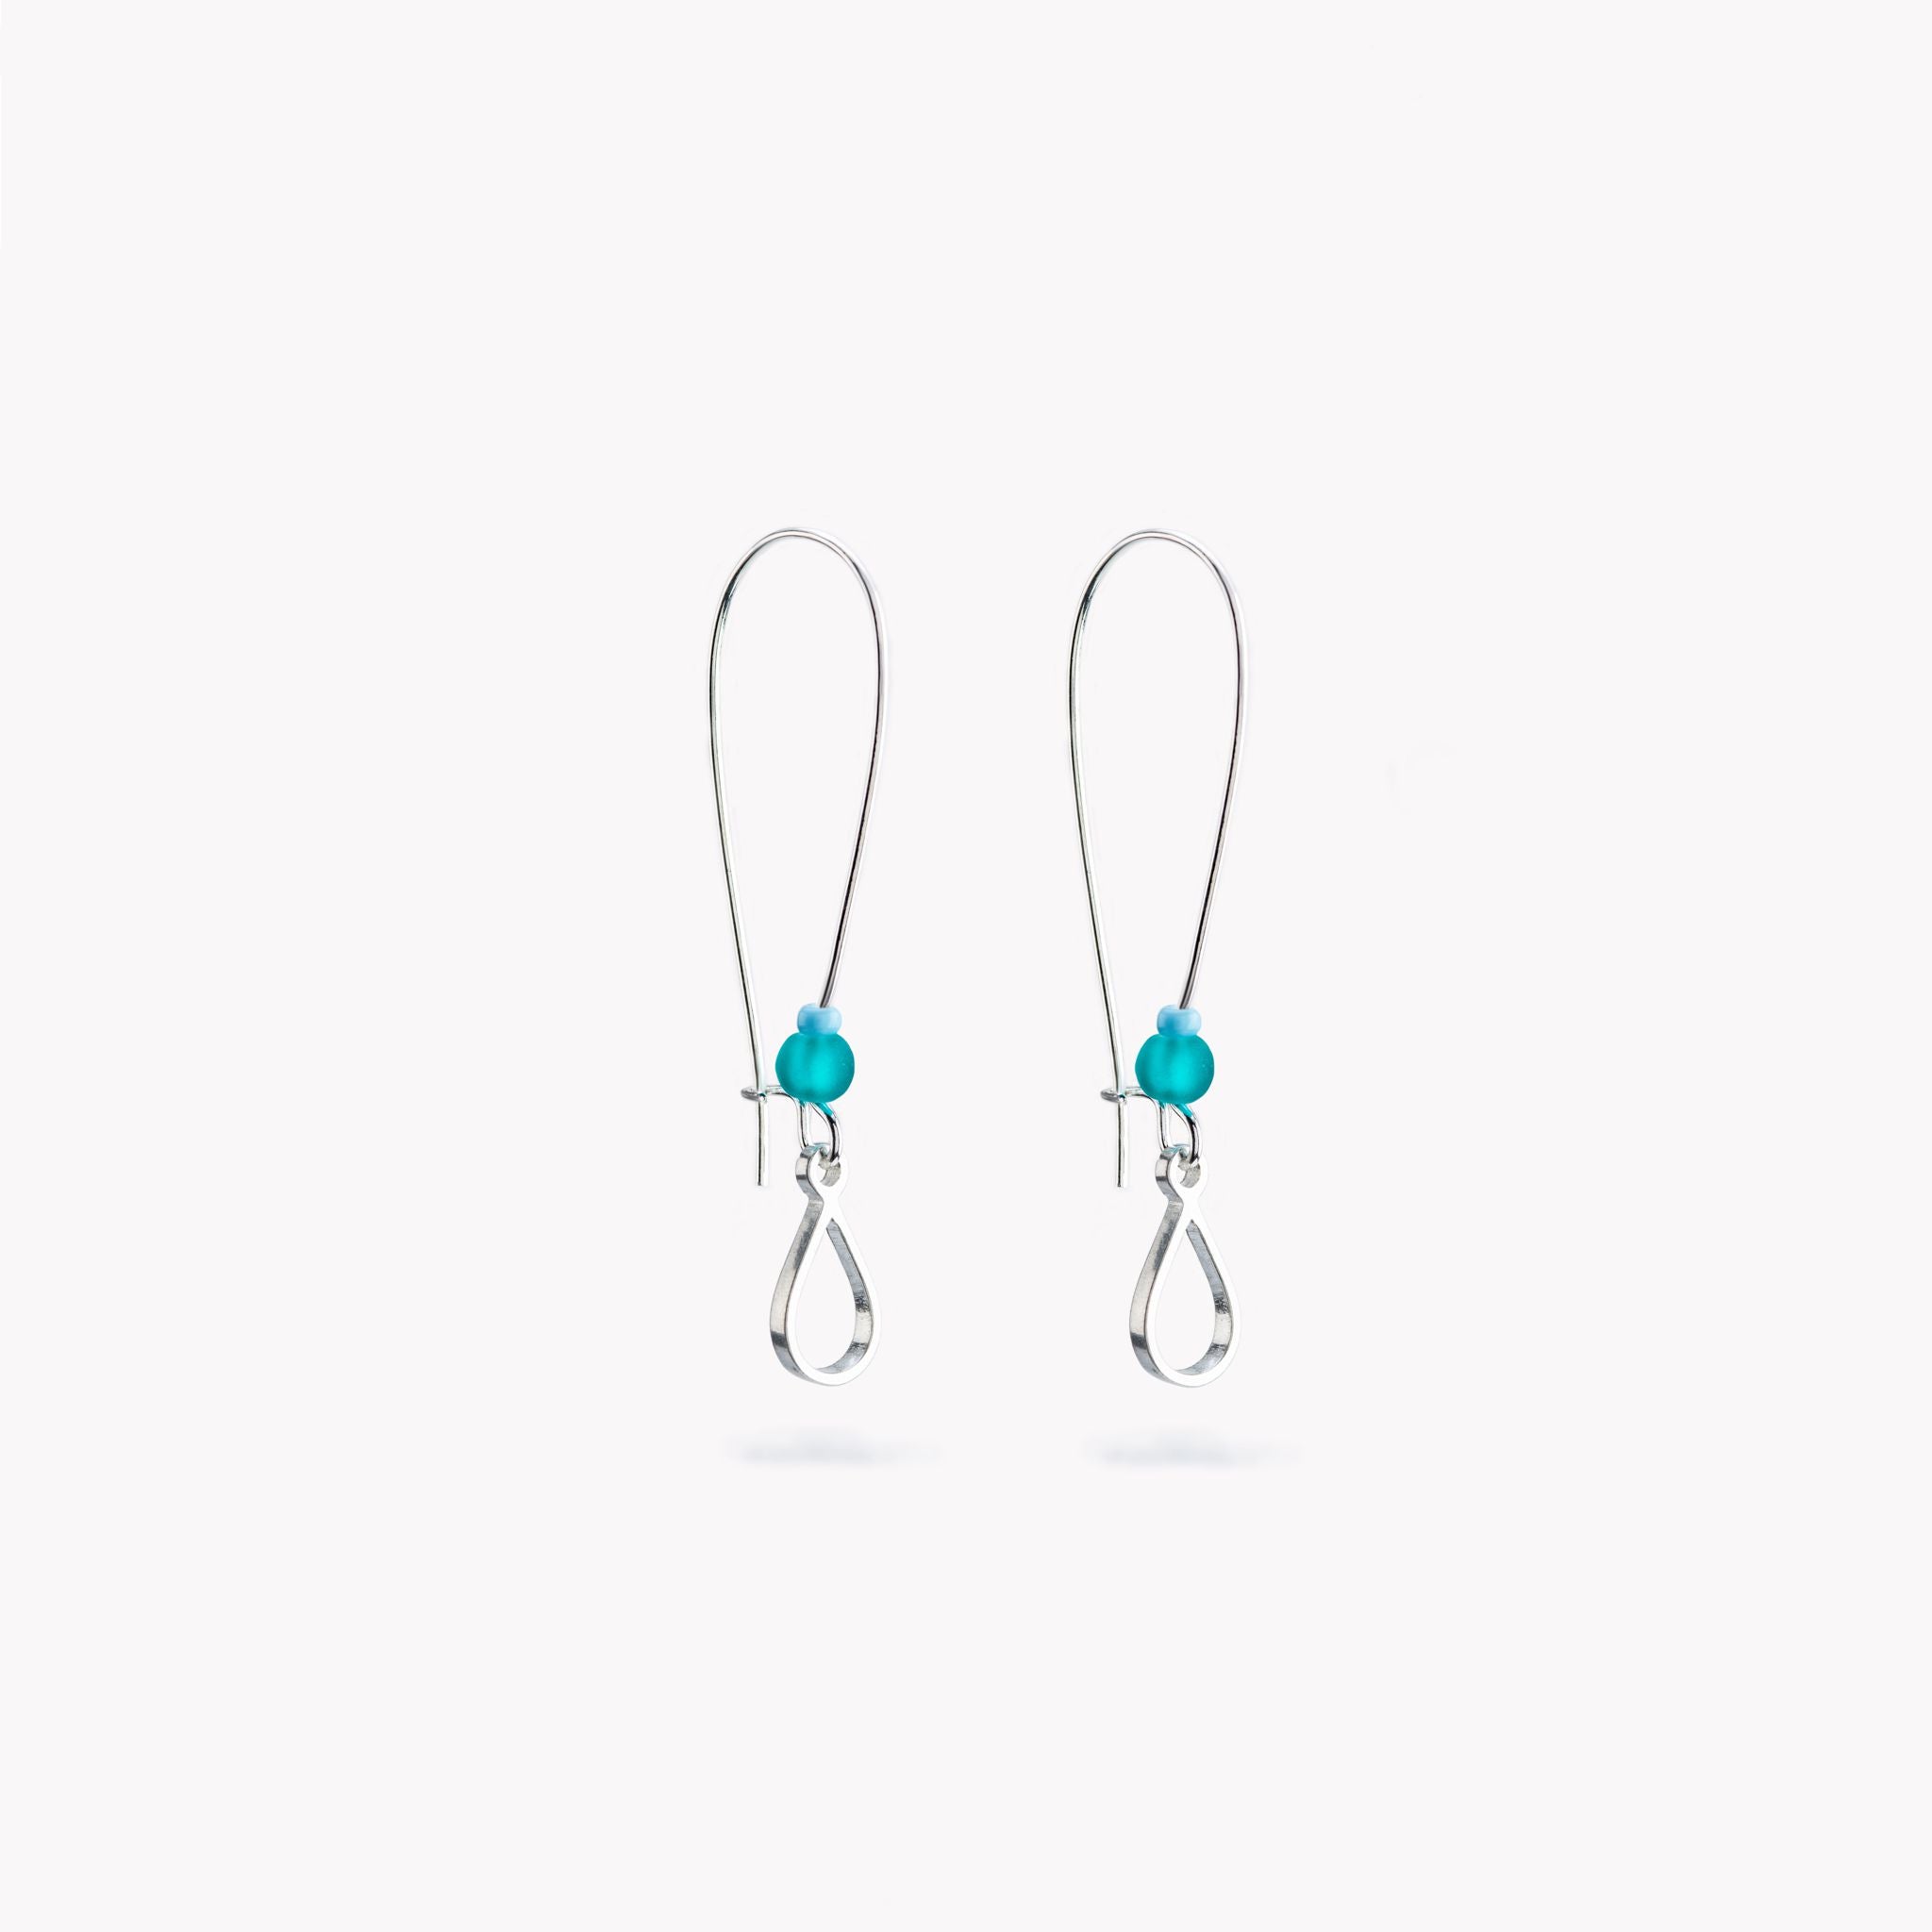 A pair of simple, teardrop shaped, pewter drop earrings with turquoise glass beads.